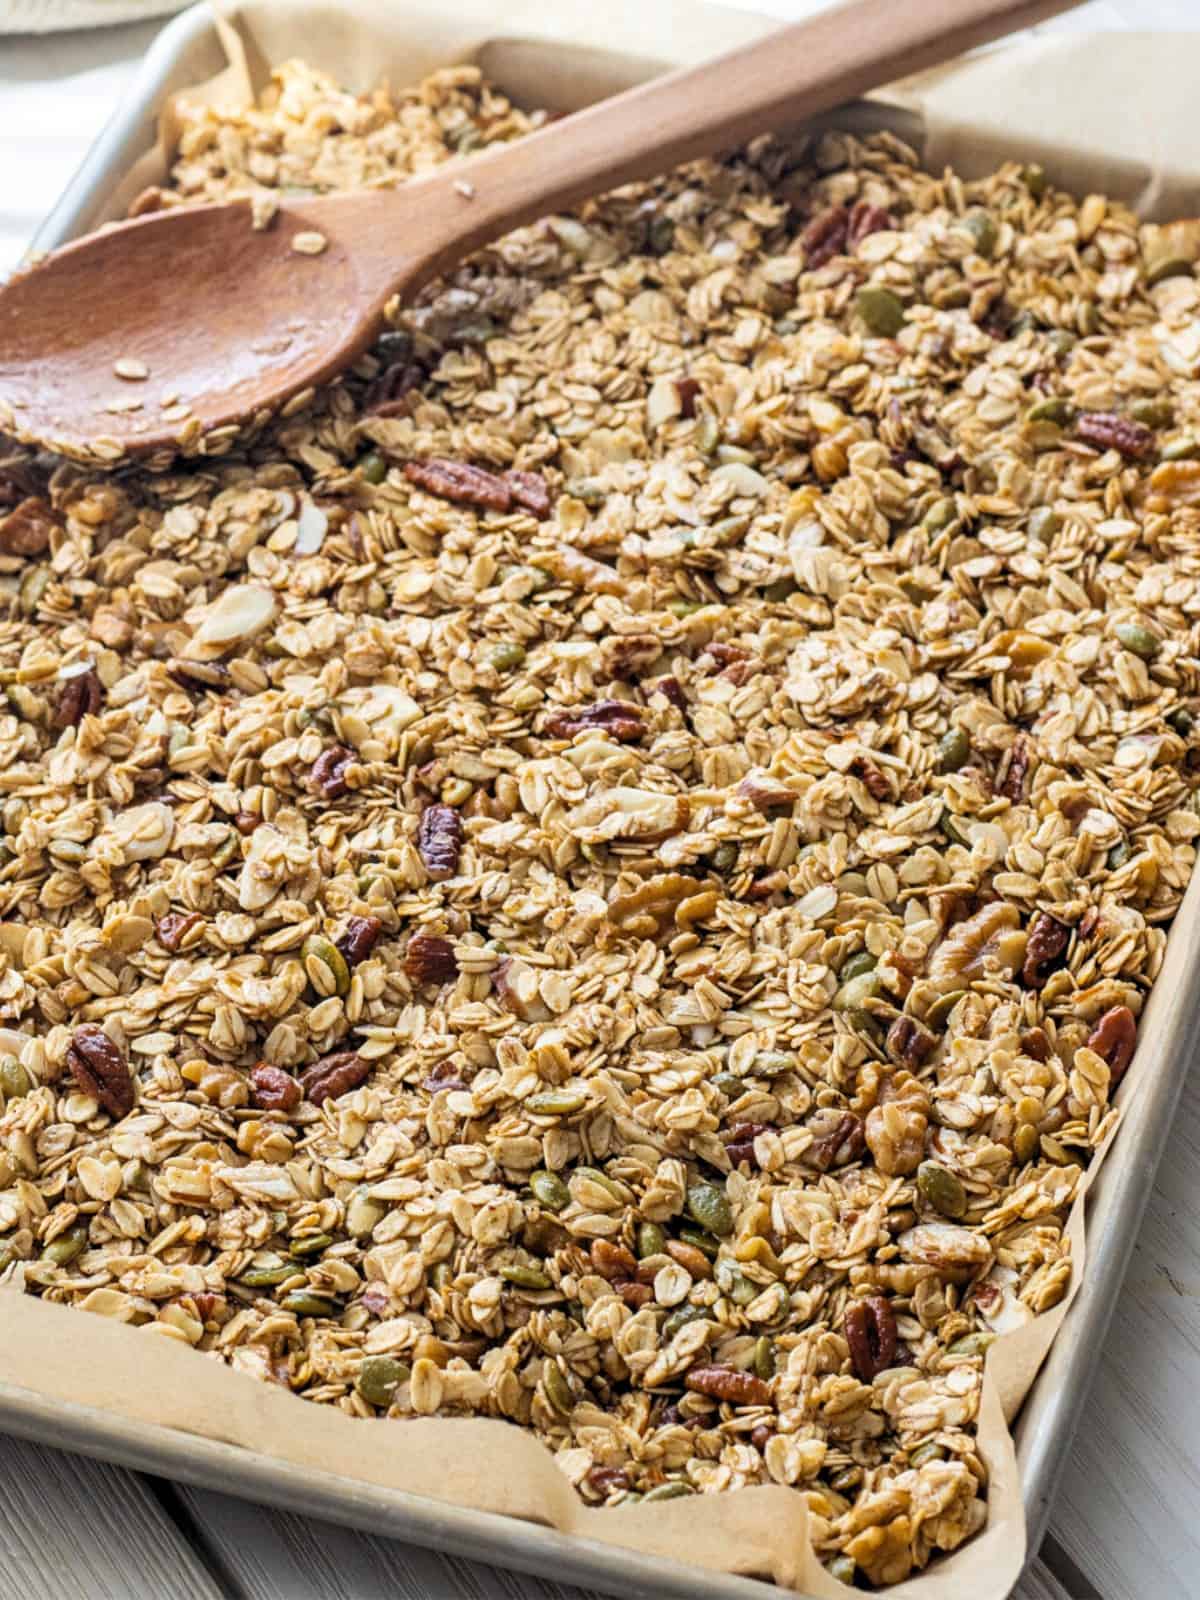 Granola mixture spread out on a baking sheet with a wooden spoon.